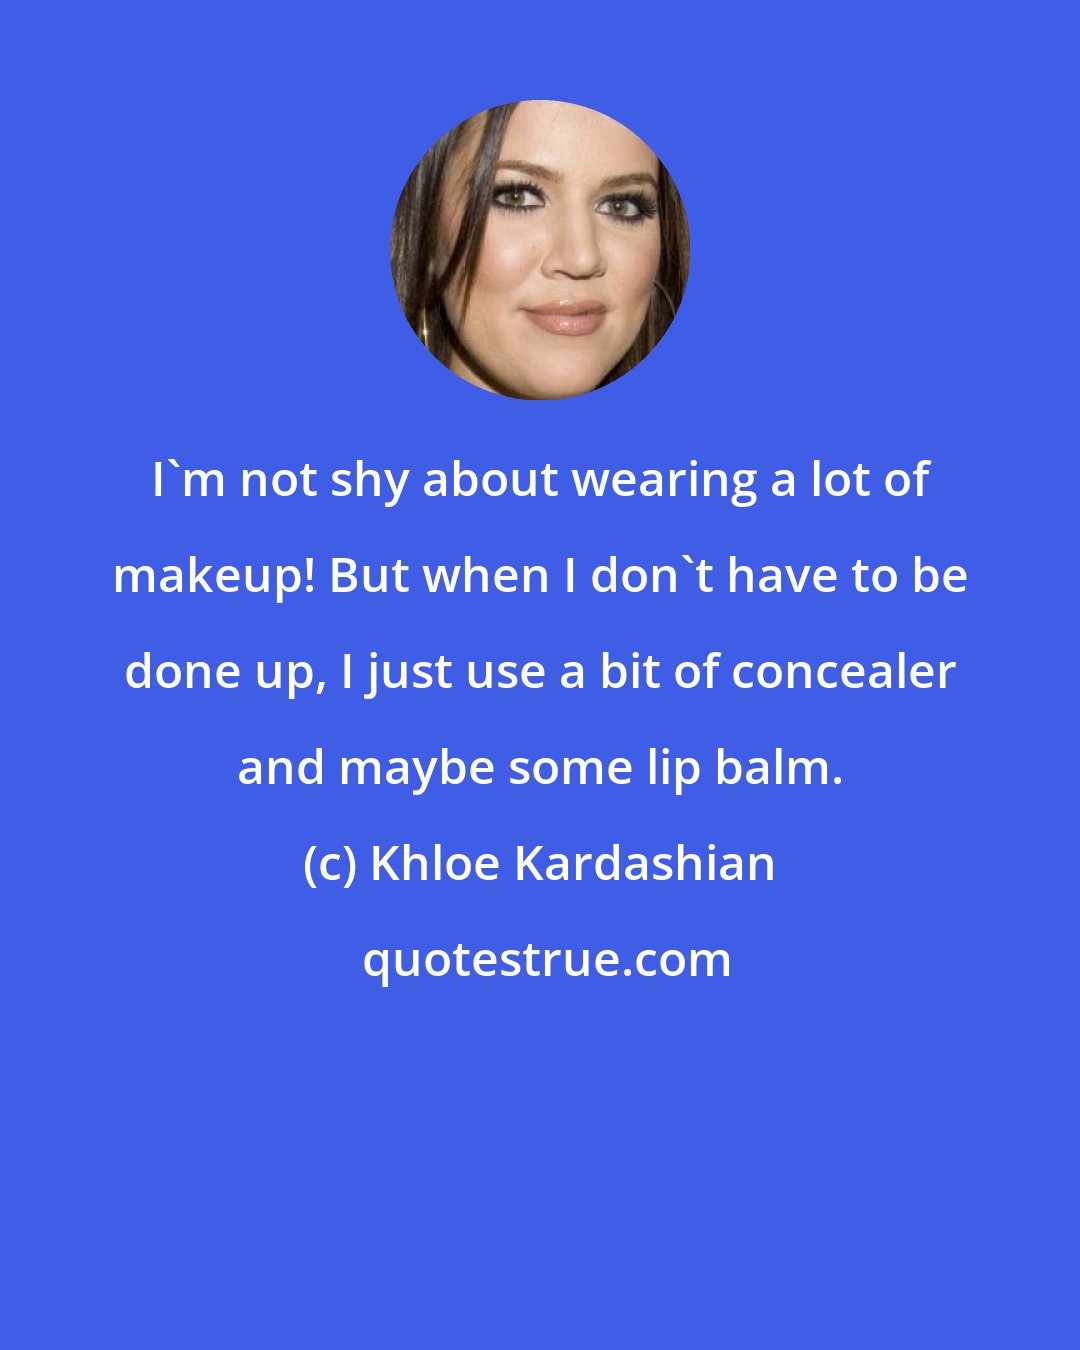 Khloe Kardashian: I'm not shy about wearing a lot of makeup! But when I don't have to be done up, I just use a bit of concealer and maybe some lip balm.